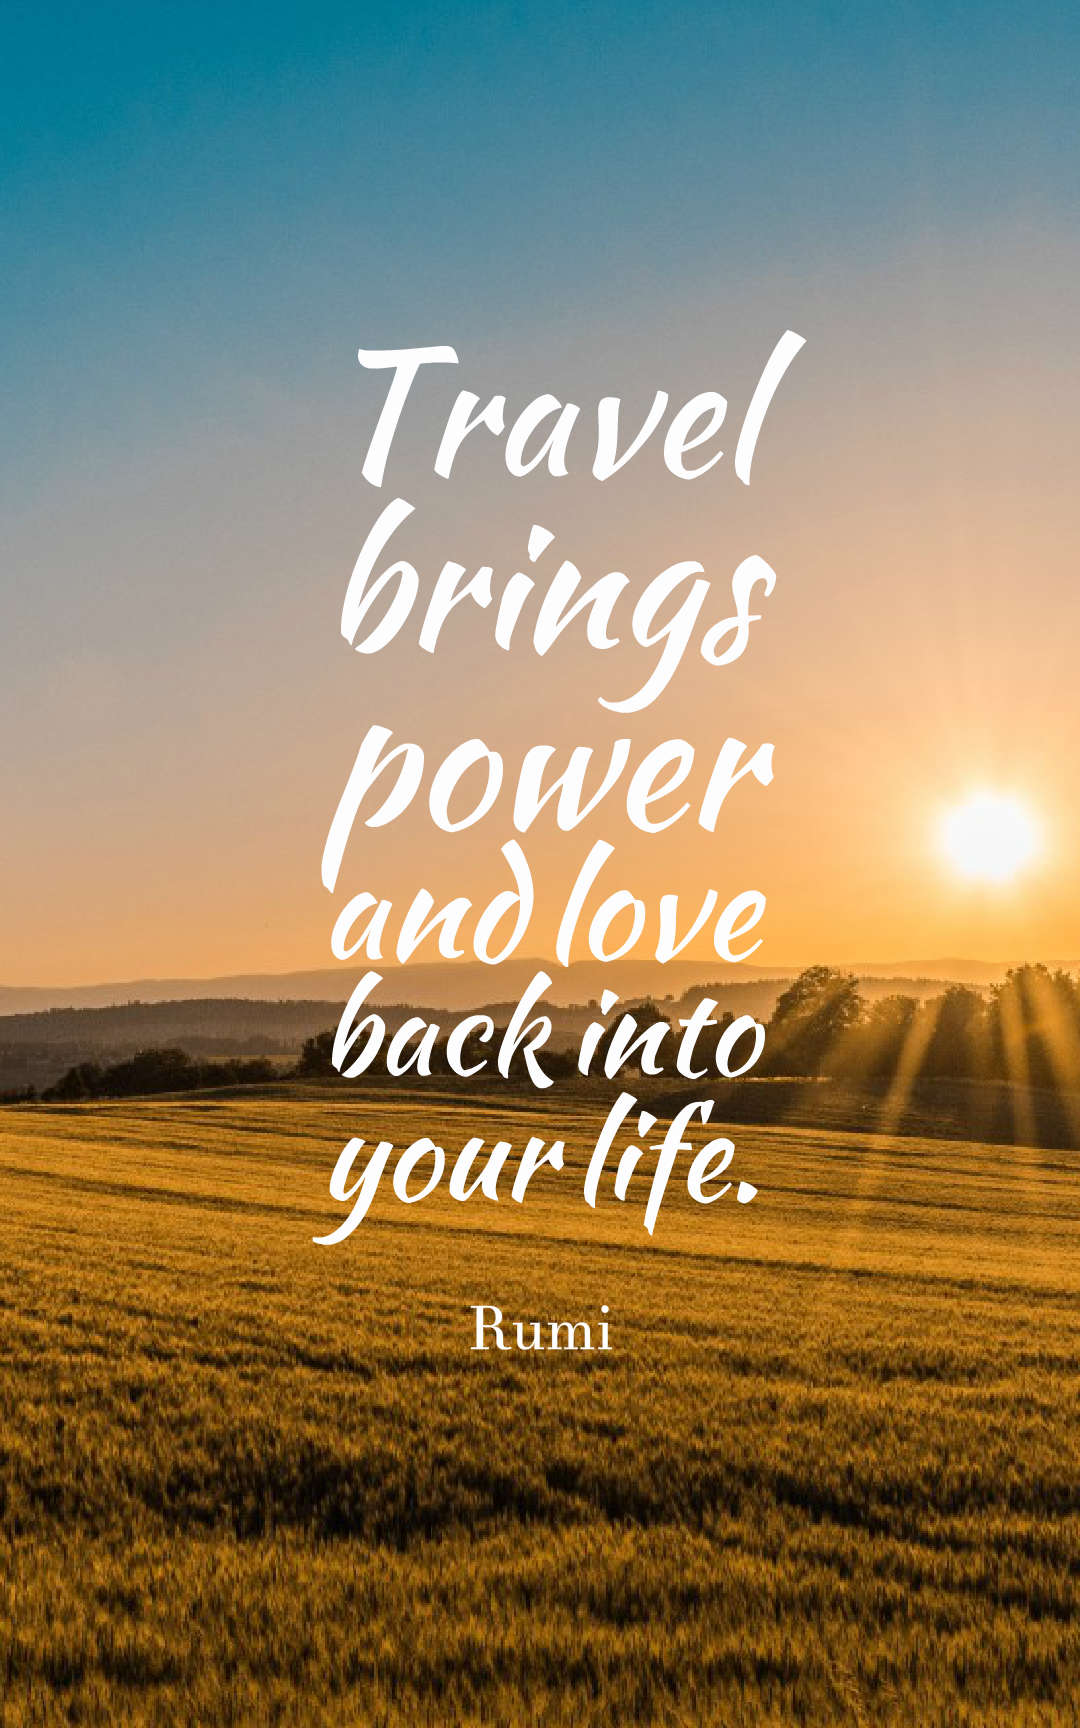 72 Inspirational Travel Quotes - Short Travel Quotes With Images